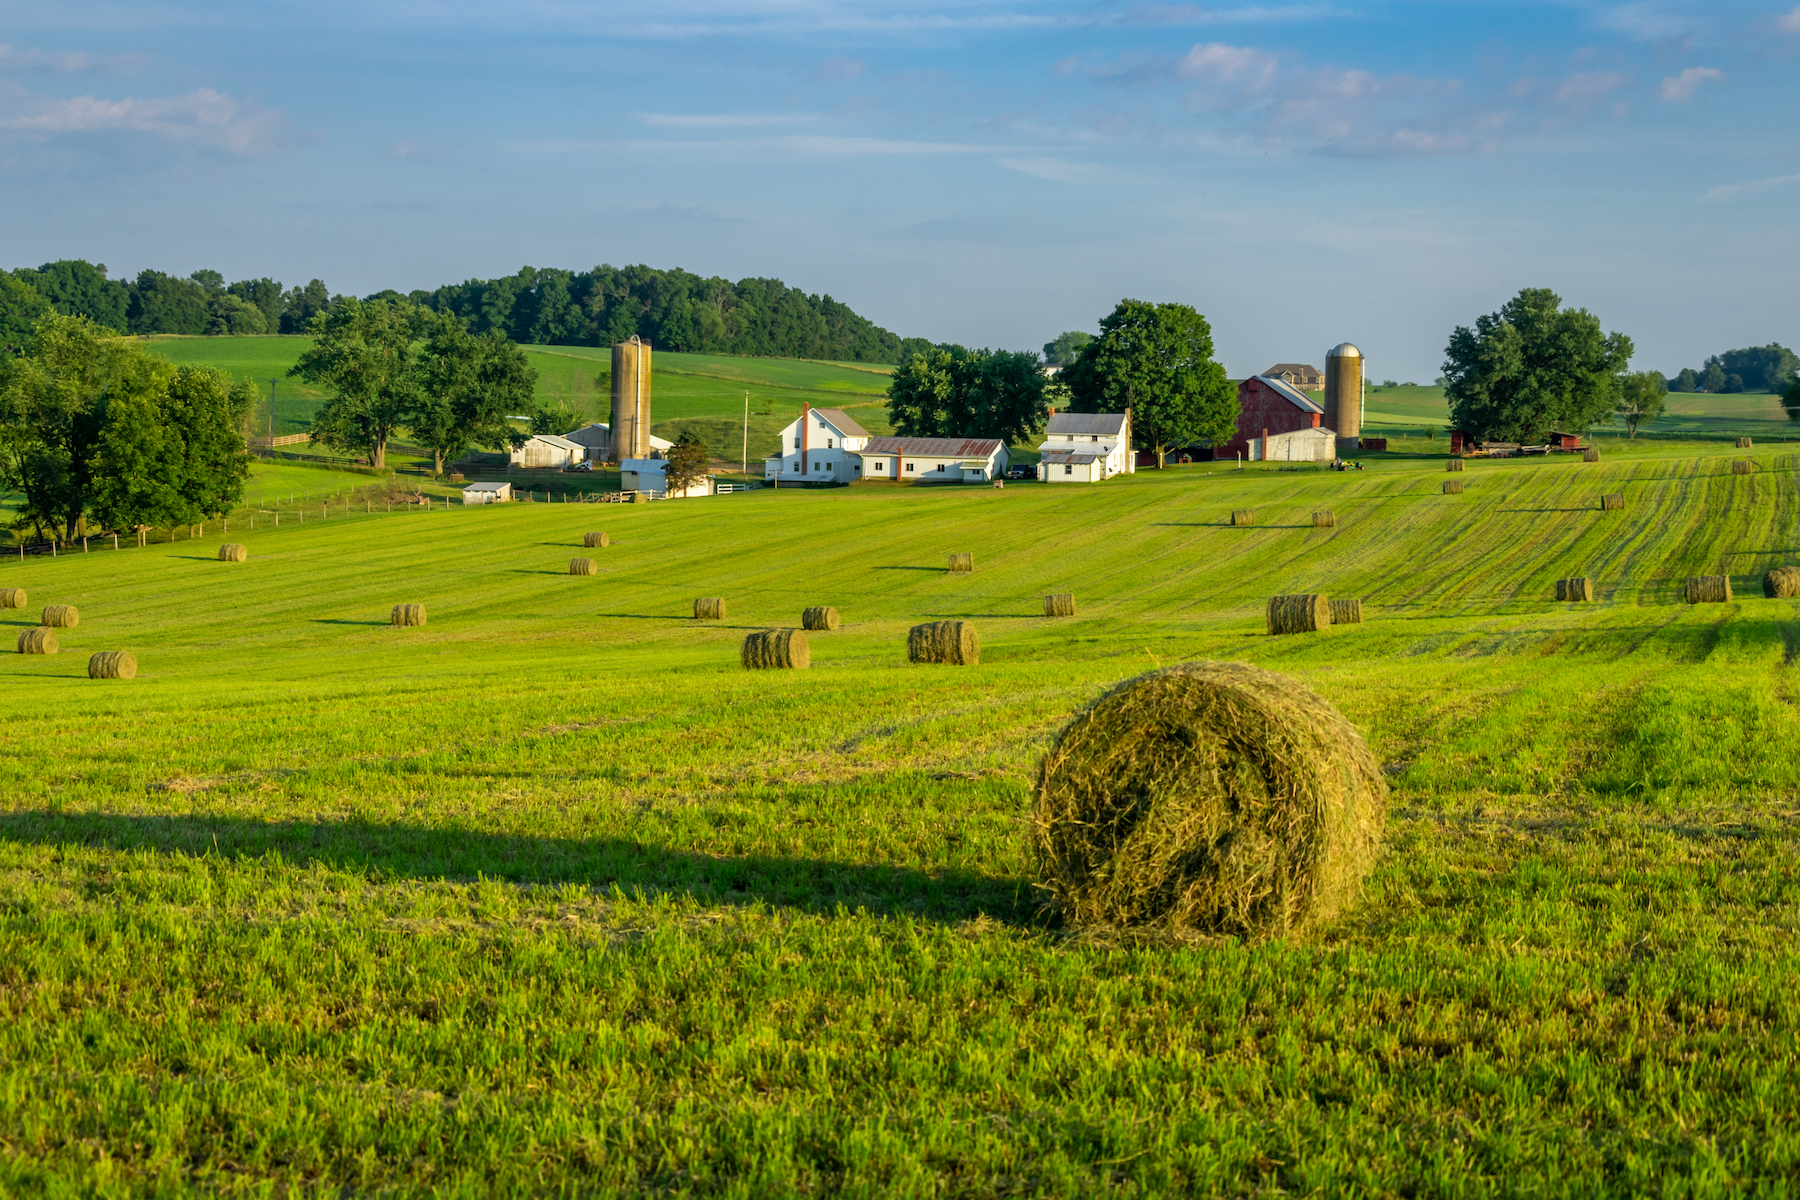 Round hay bales on slightly rolling hills in amish country. Farm and farm house in background.; Shutterstock ID 1807384735; purchase_order: -; job: -; client: -; other: -